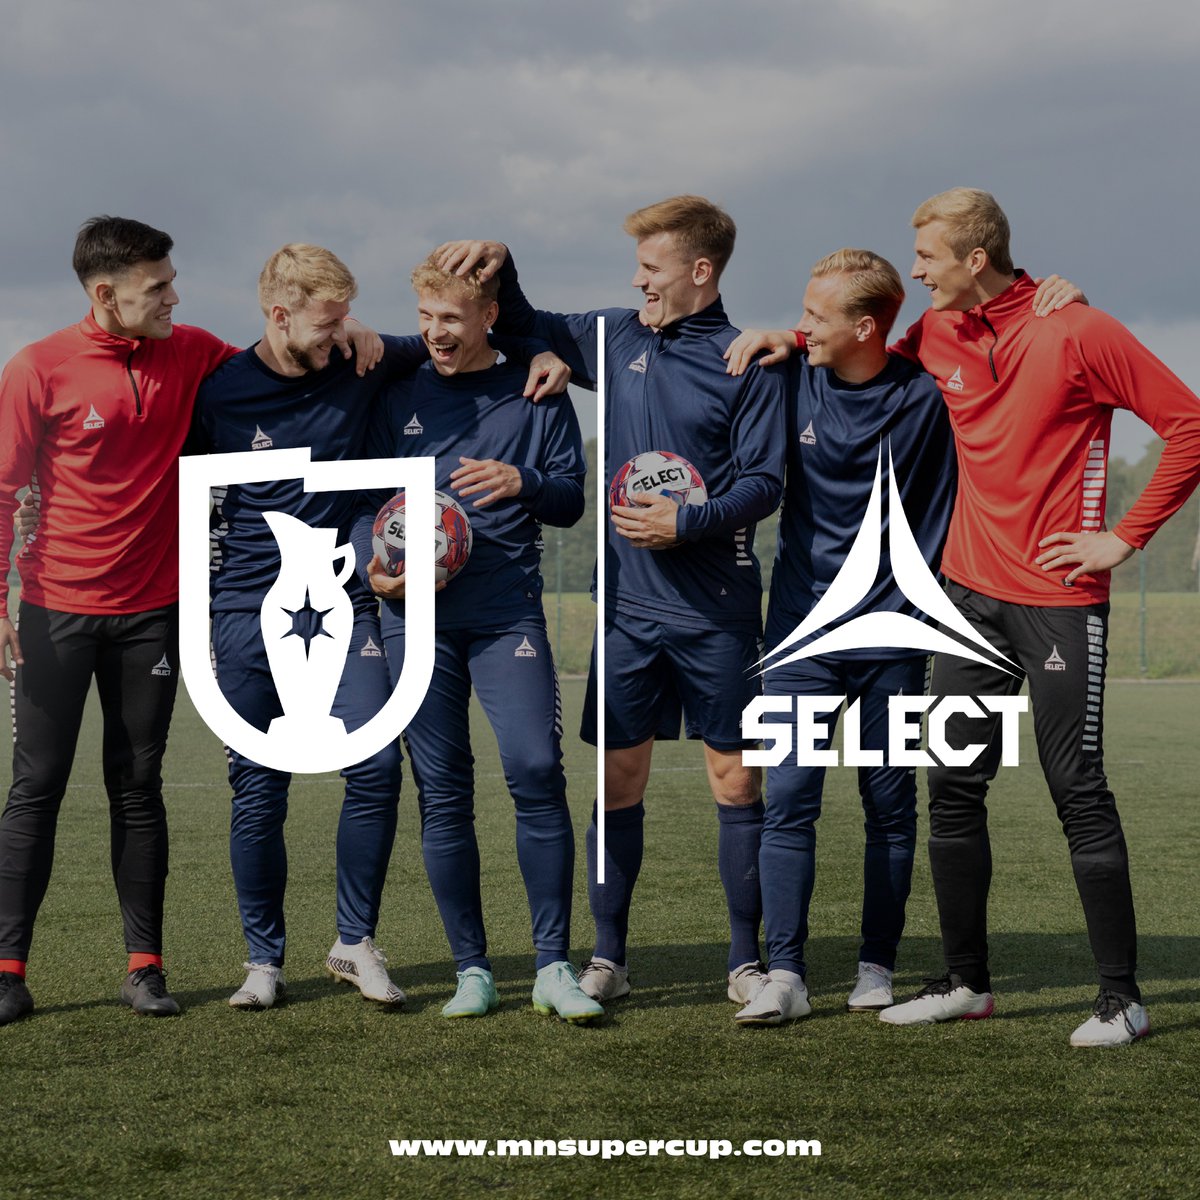 The pitch is calling. Are you ready to answer? The @Select_America Brillant Super Team Ball is designed to ignite your game, and we’re delighted to roll them out as the official ball and sponsor of the #MinnesotaSuperCup! #SelectSportAmerica